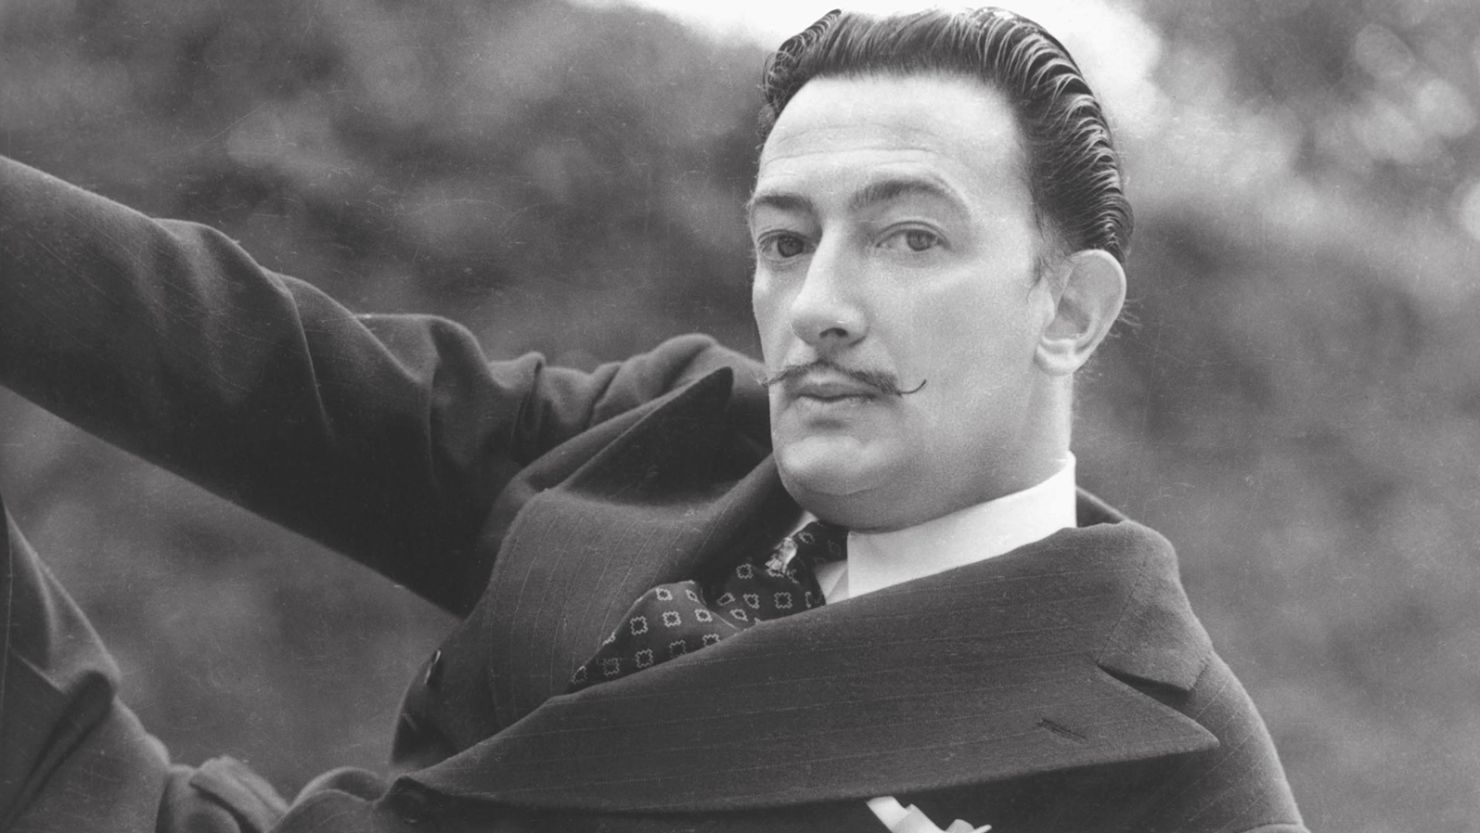 Who Was Salvador Dalí and Why Was He So Important?